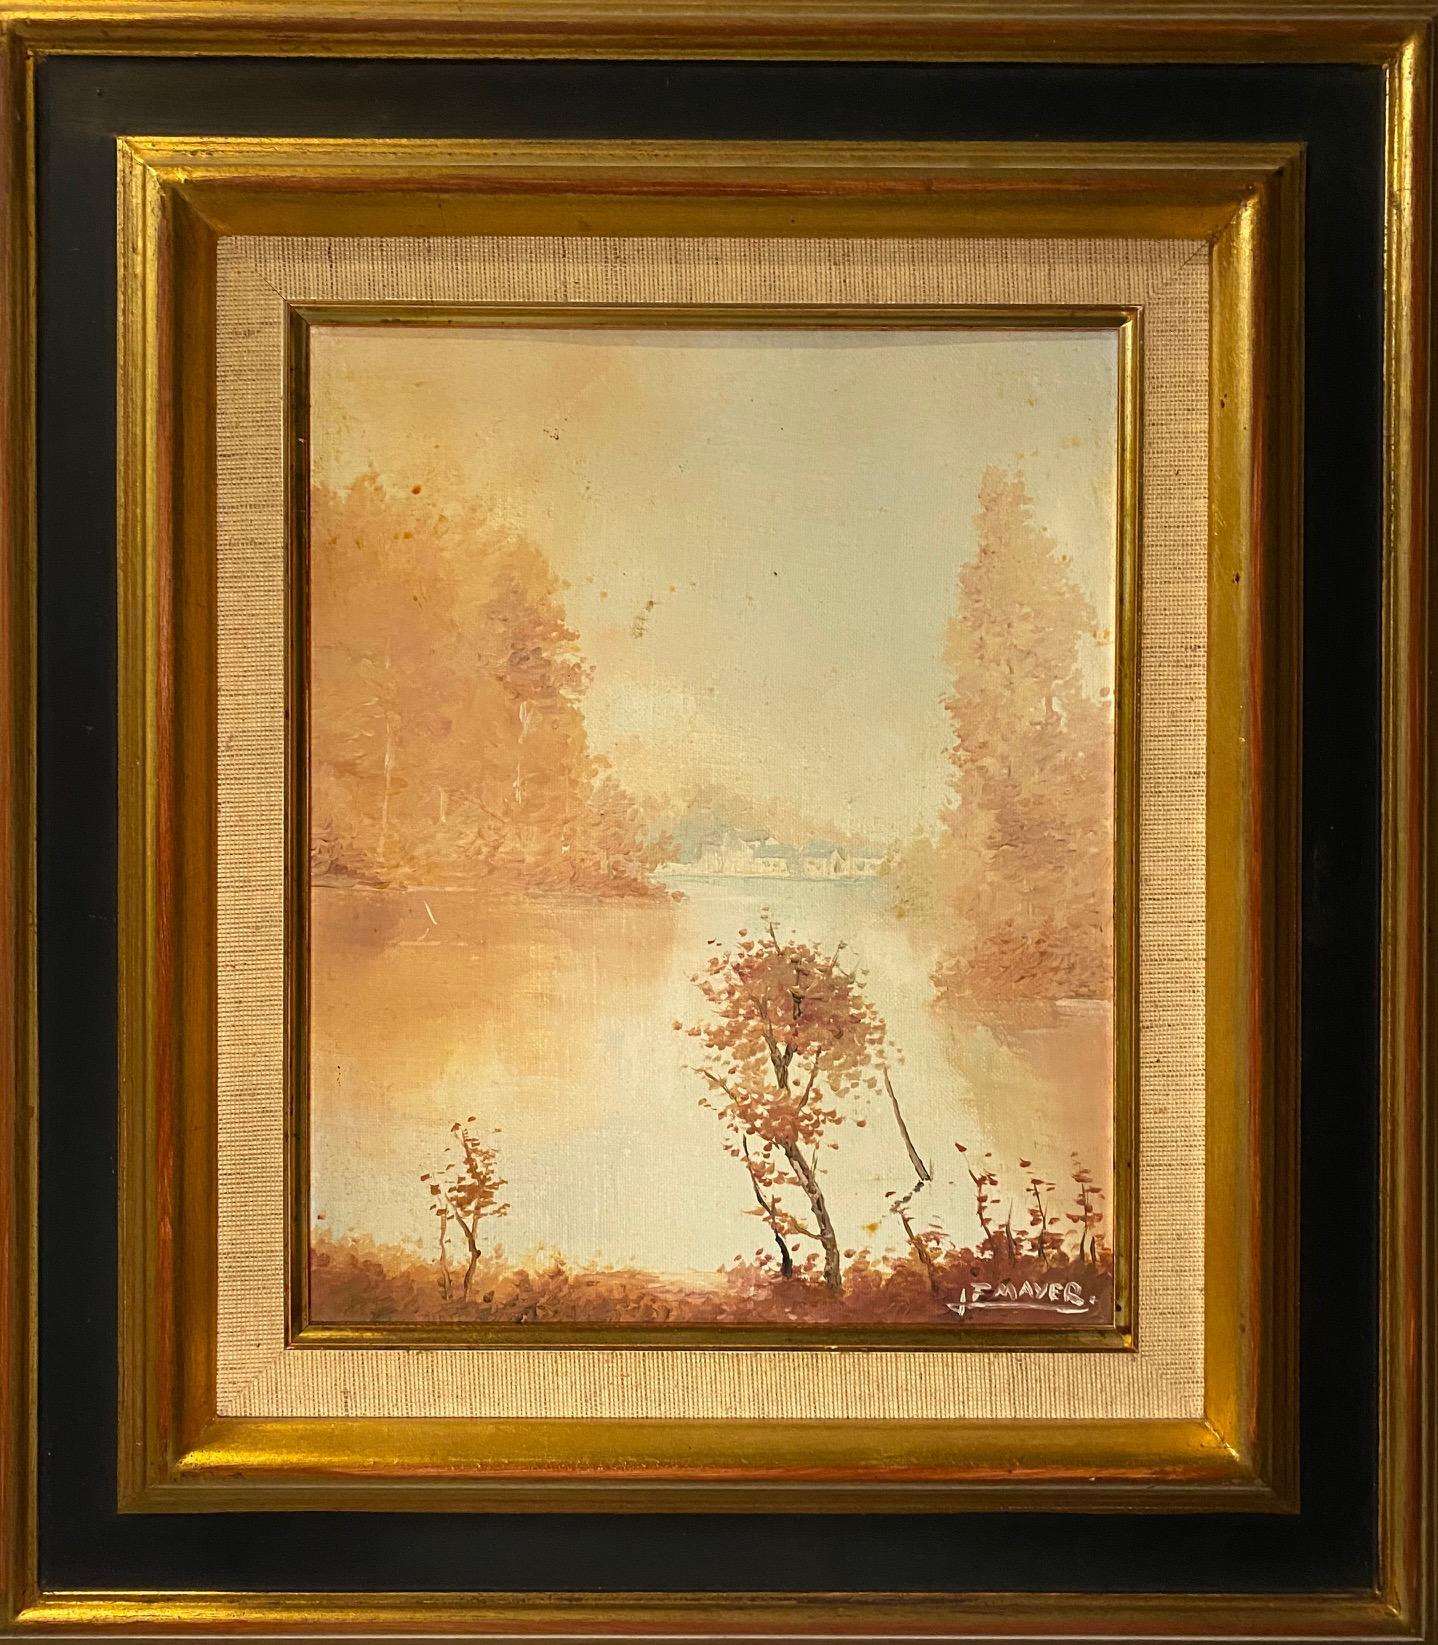 Lake's lights by J.F Mayer - Oil on canvas 22x27 cm